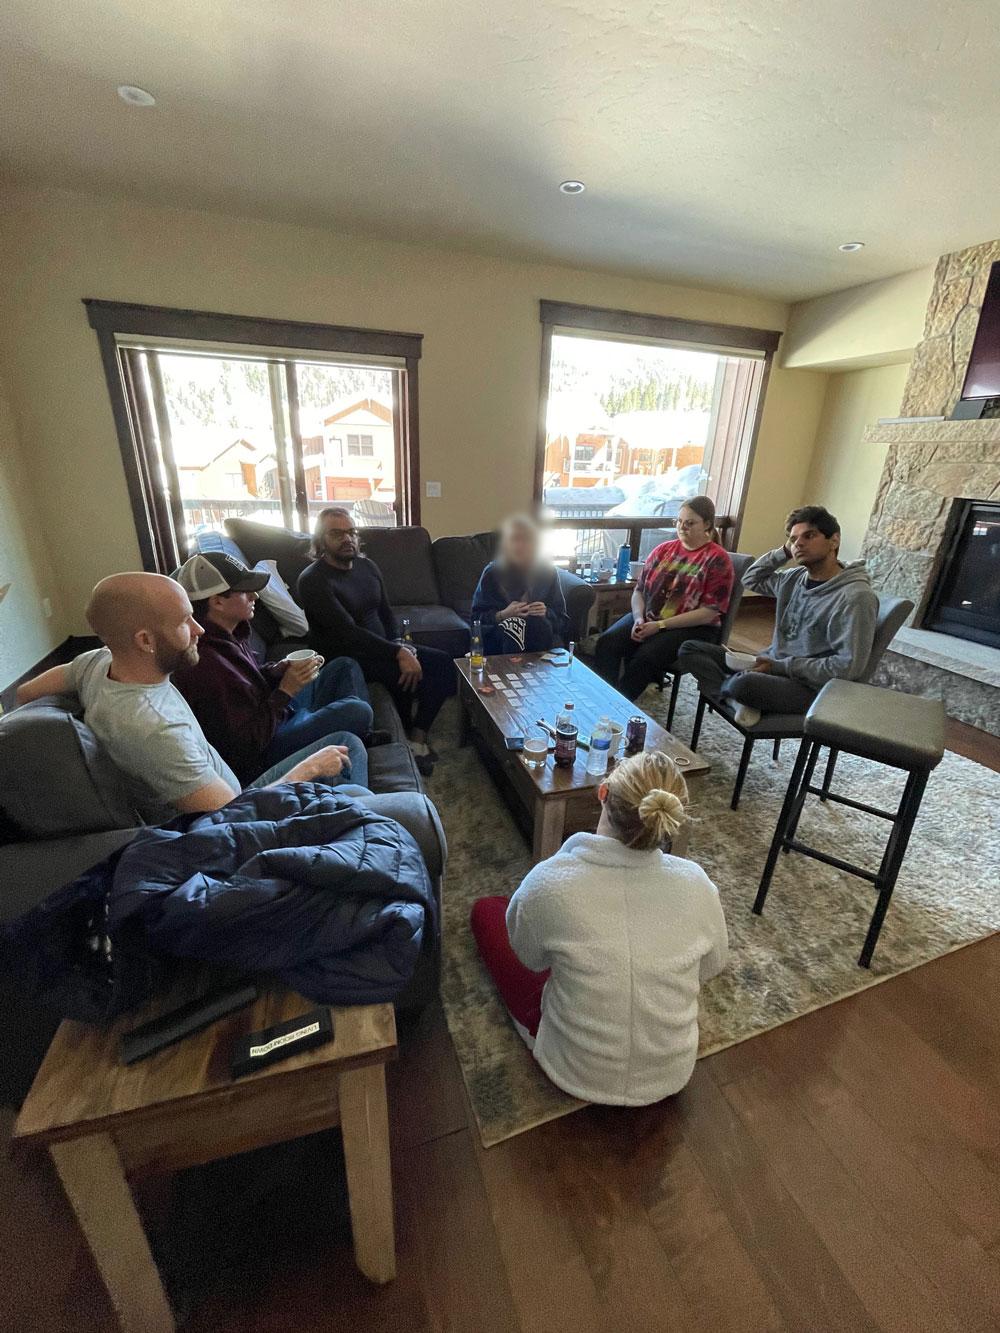 Students gathered in living room of ski cabin